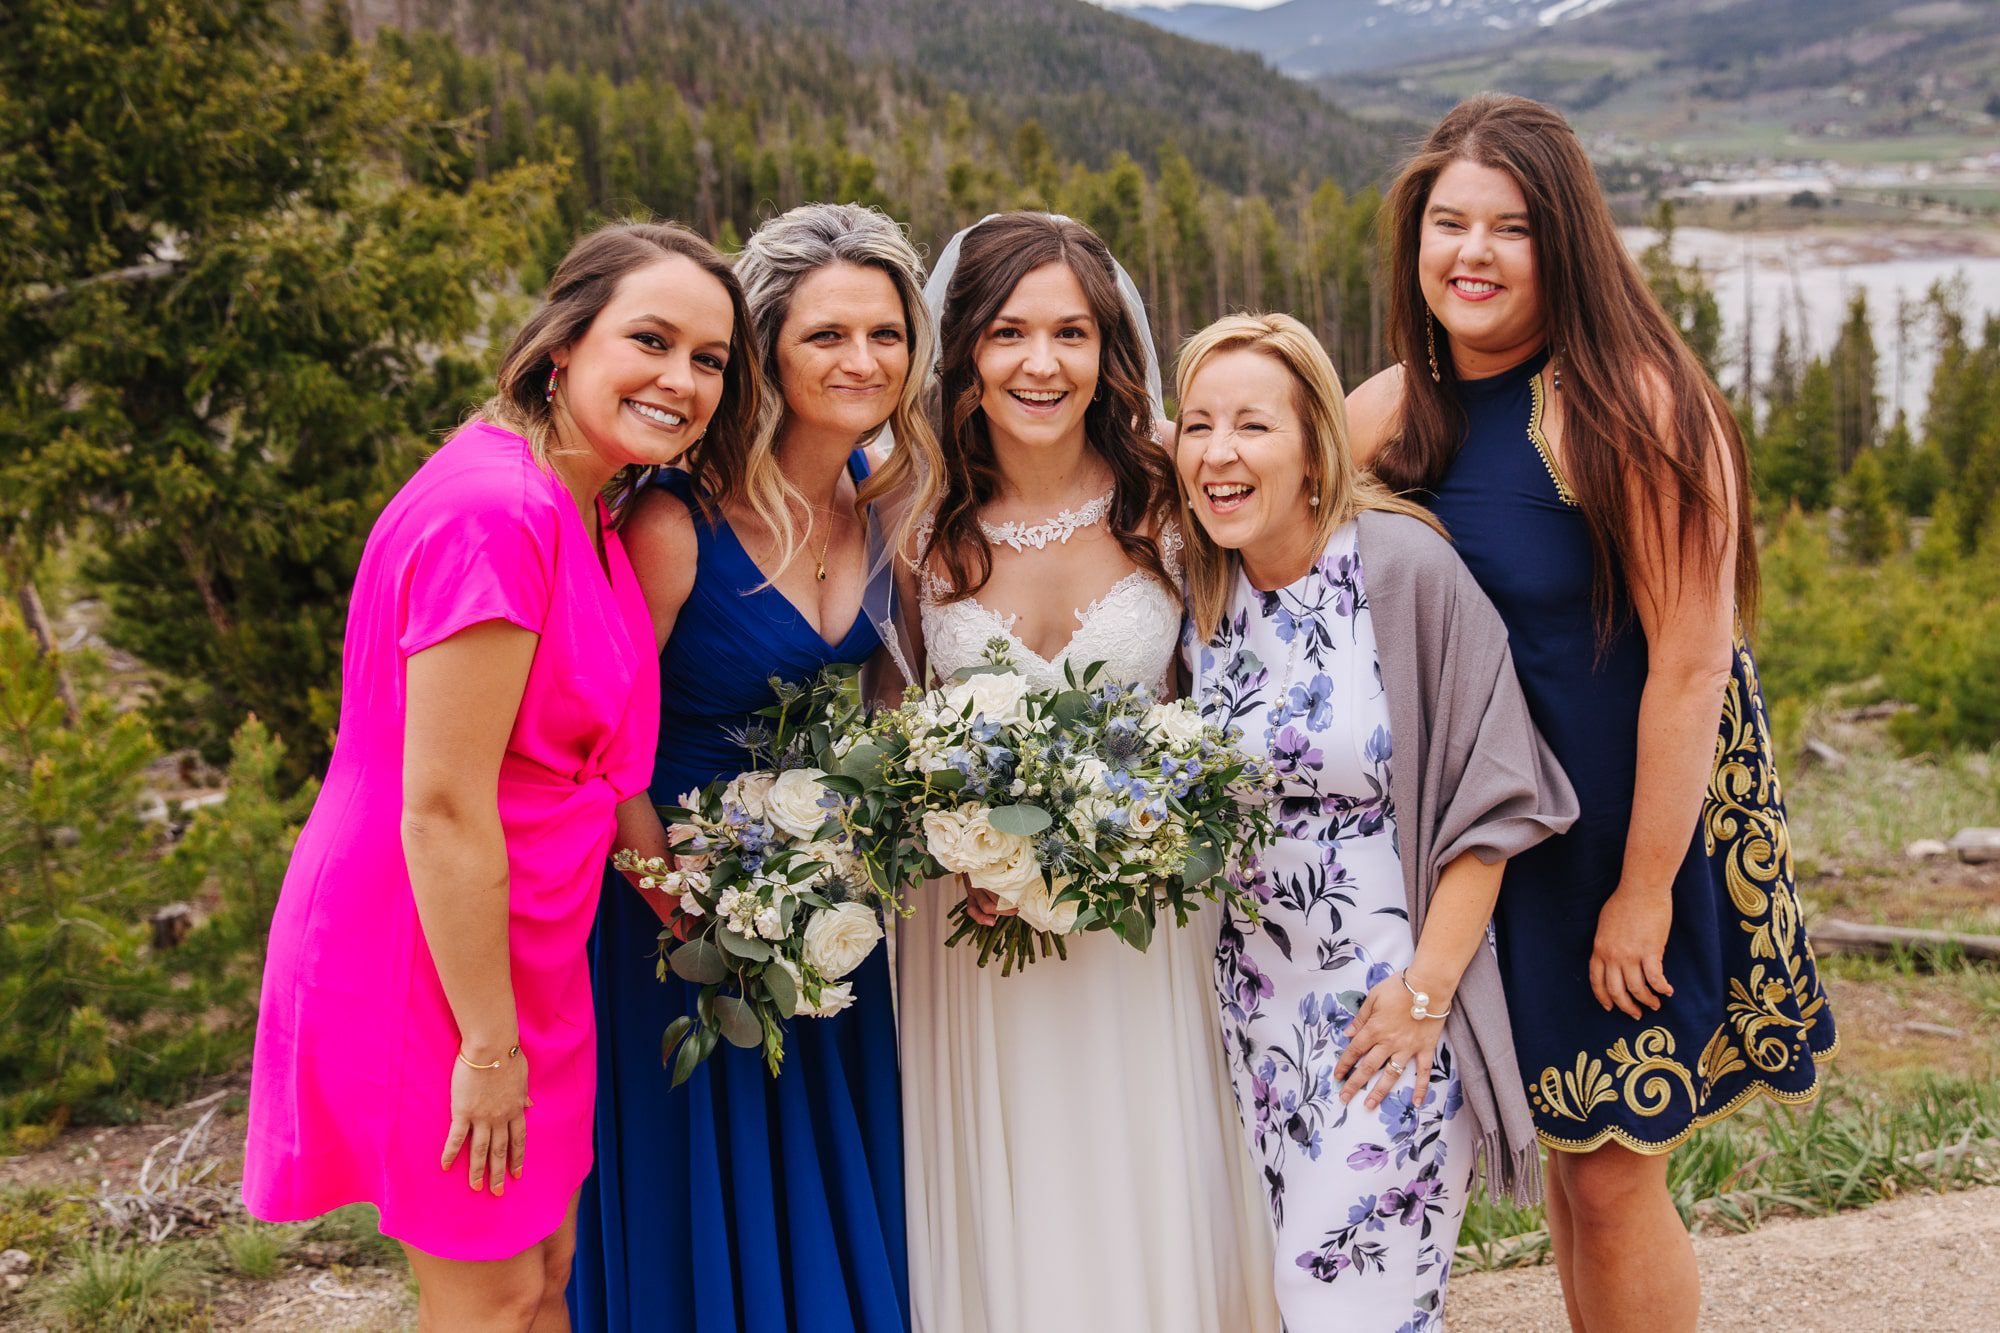 sapphire point, sapphire point wedding, frisco wedding, frisco wedding photographer, mountain wedding, outdoor wedding, scenic wedding, intimate wedding, bride tribe, bride with friends, bride with bridesmaids